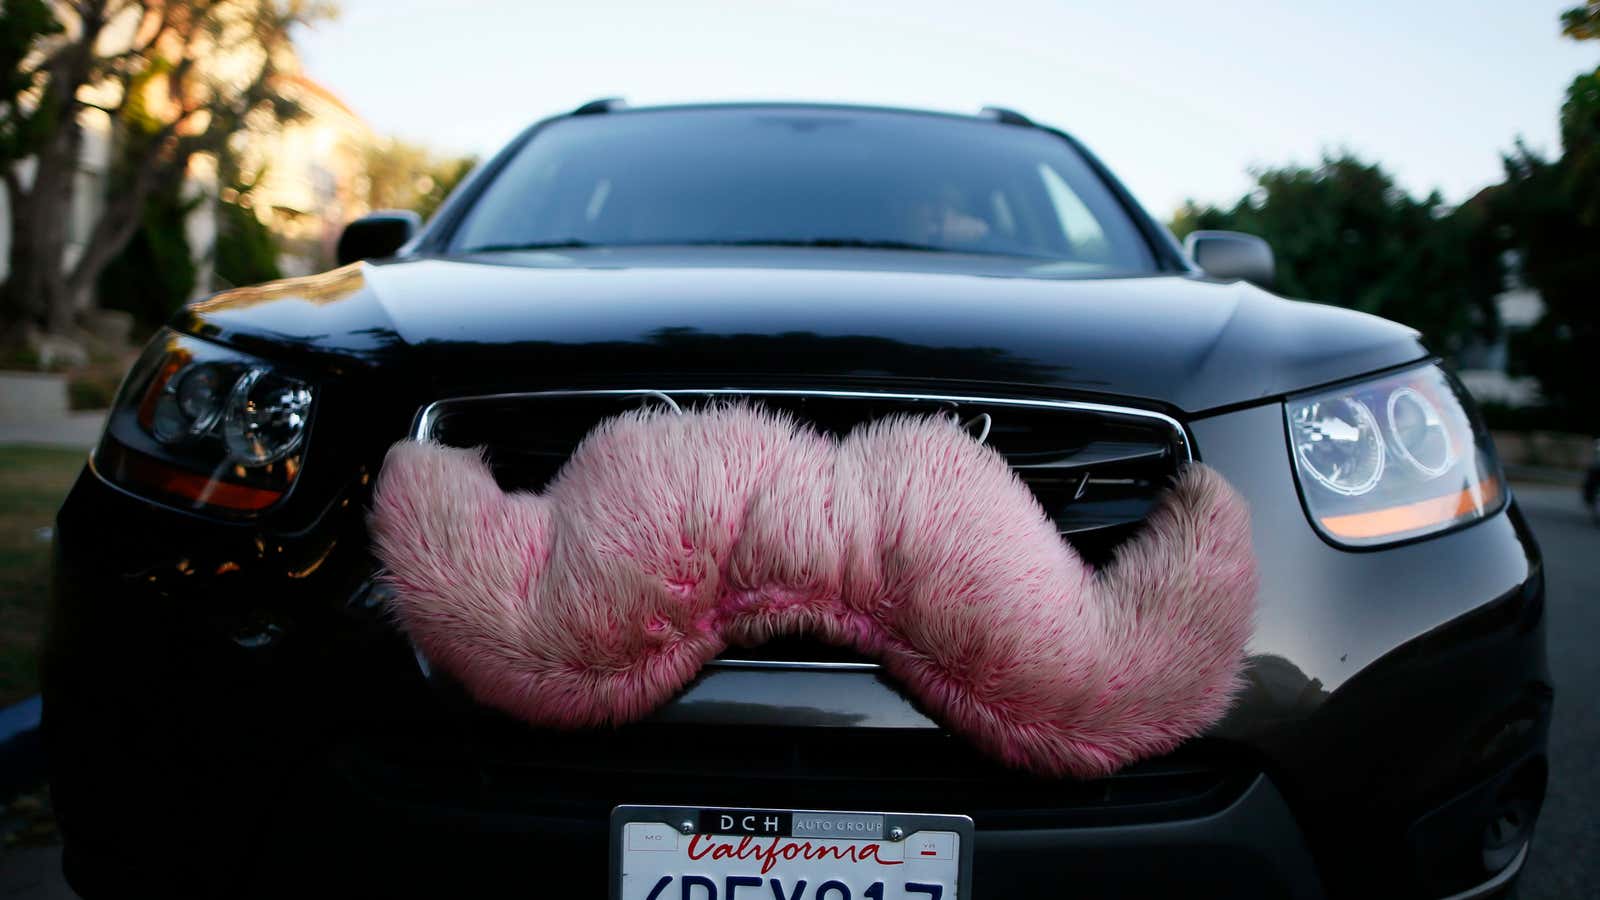 Still a long way to go for Lyft.